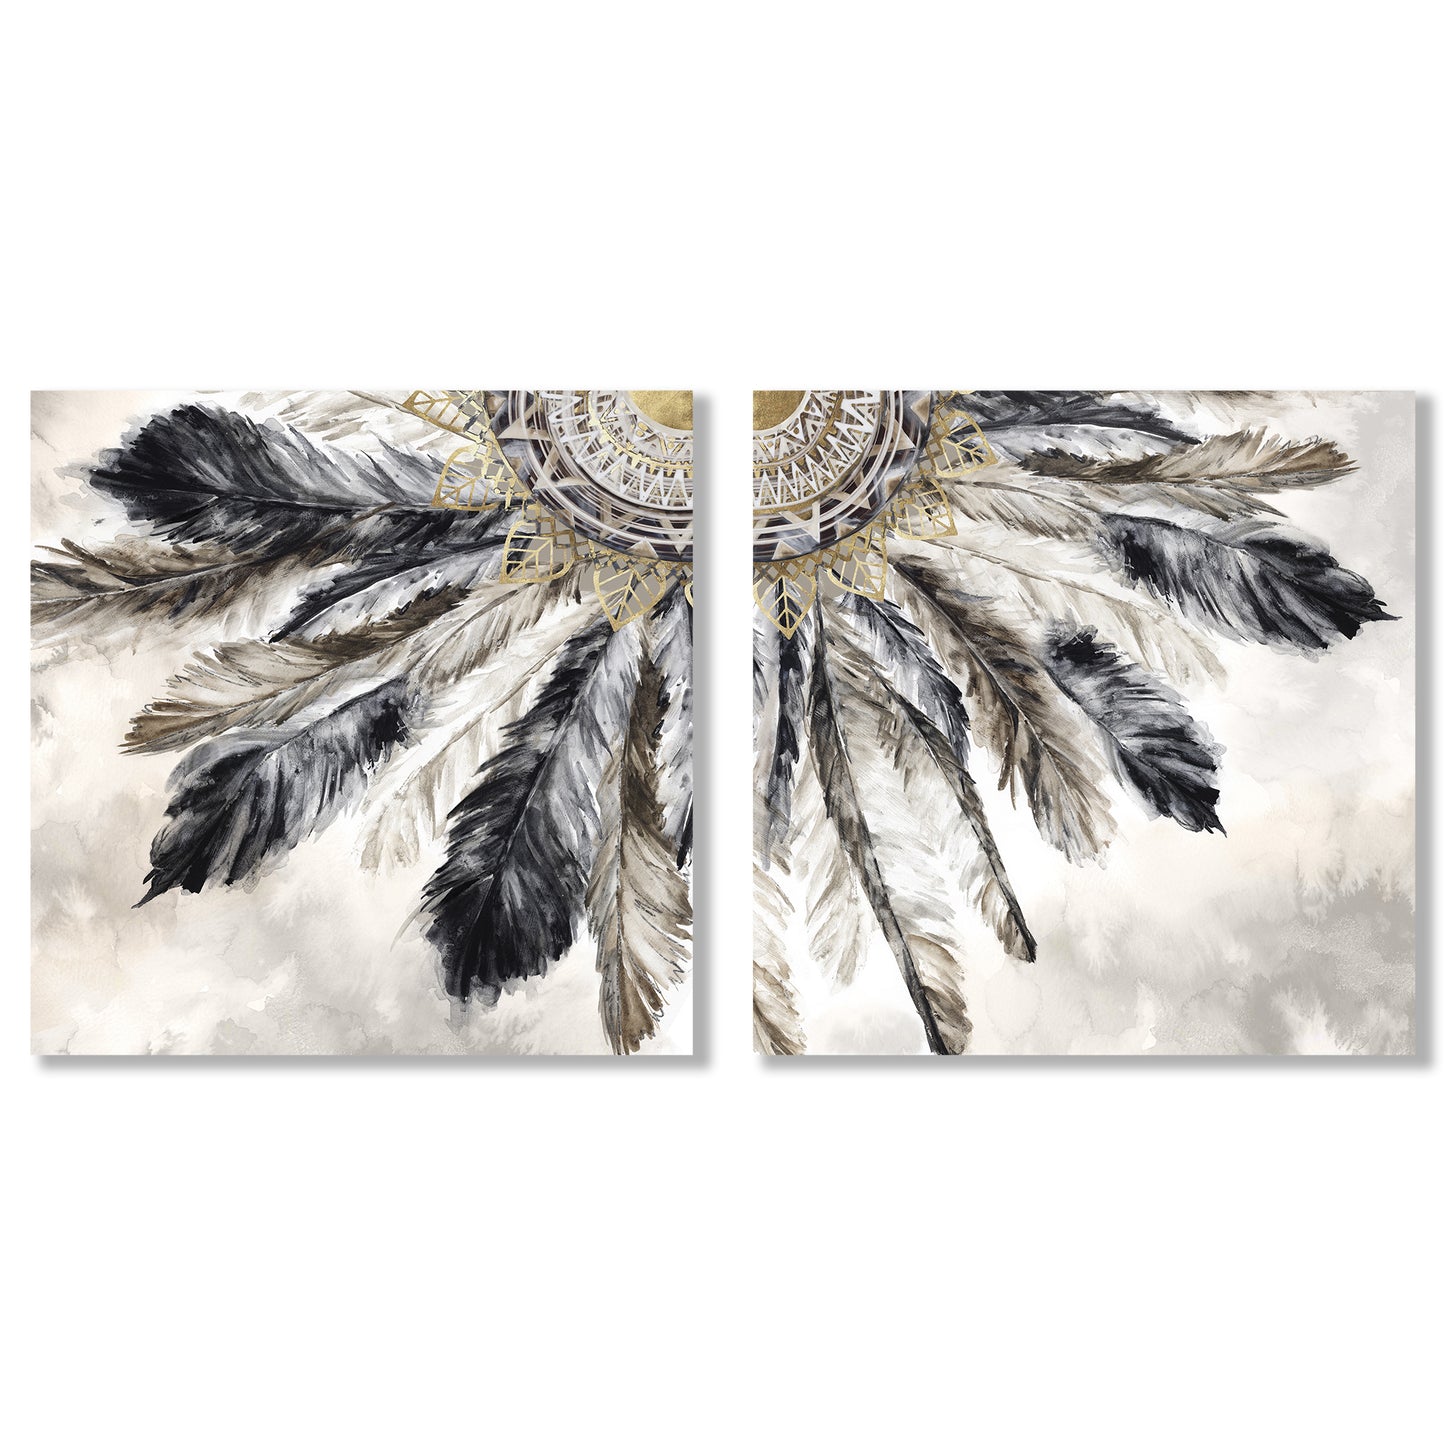 Necklace of Feathers by PI Creative Art - 2 Piece Gallery Wrapped Canvas Set - Art Set - Americanflat